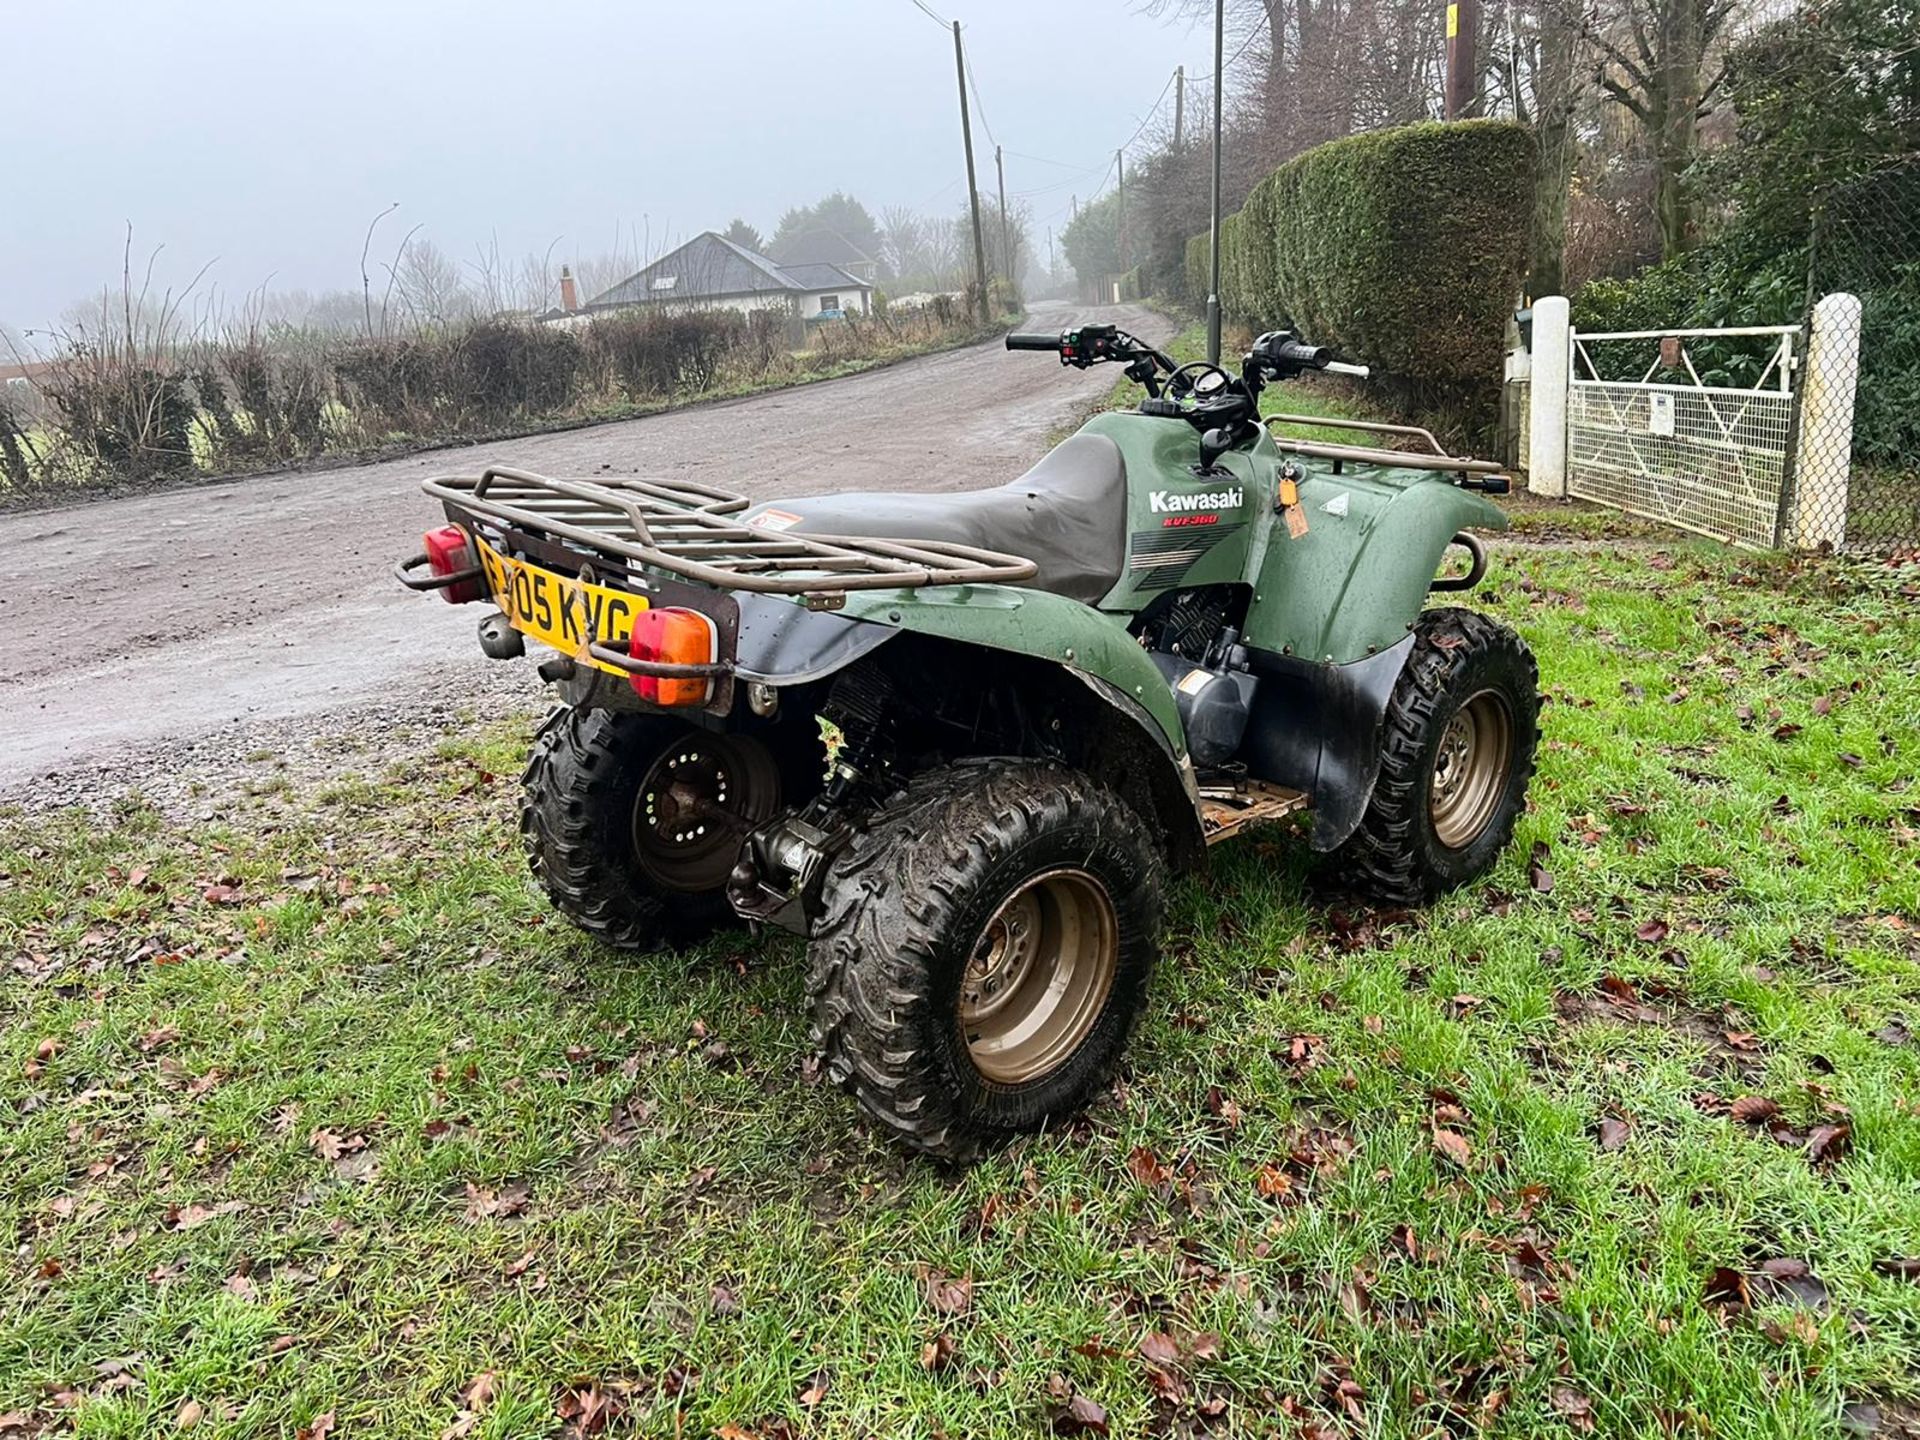 KAWASAKI KVF360 4WD FARM QUAD BIKE, RUNS AND DRIVES WELL, SHOWING A LOW 3438 HOURS PLUS VAT* - Image 7 of 13